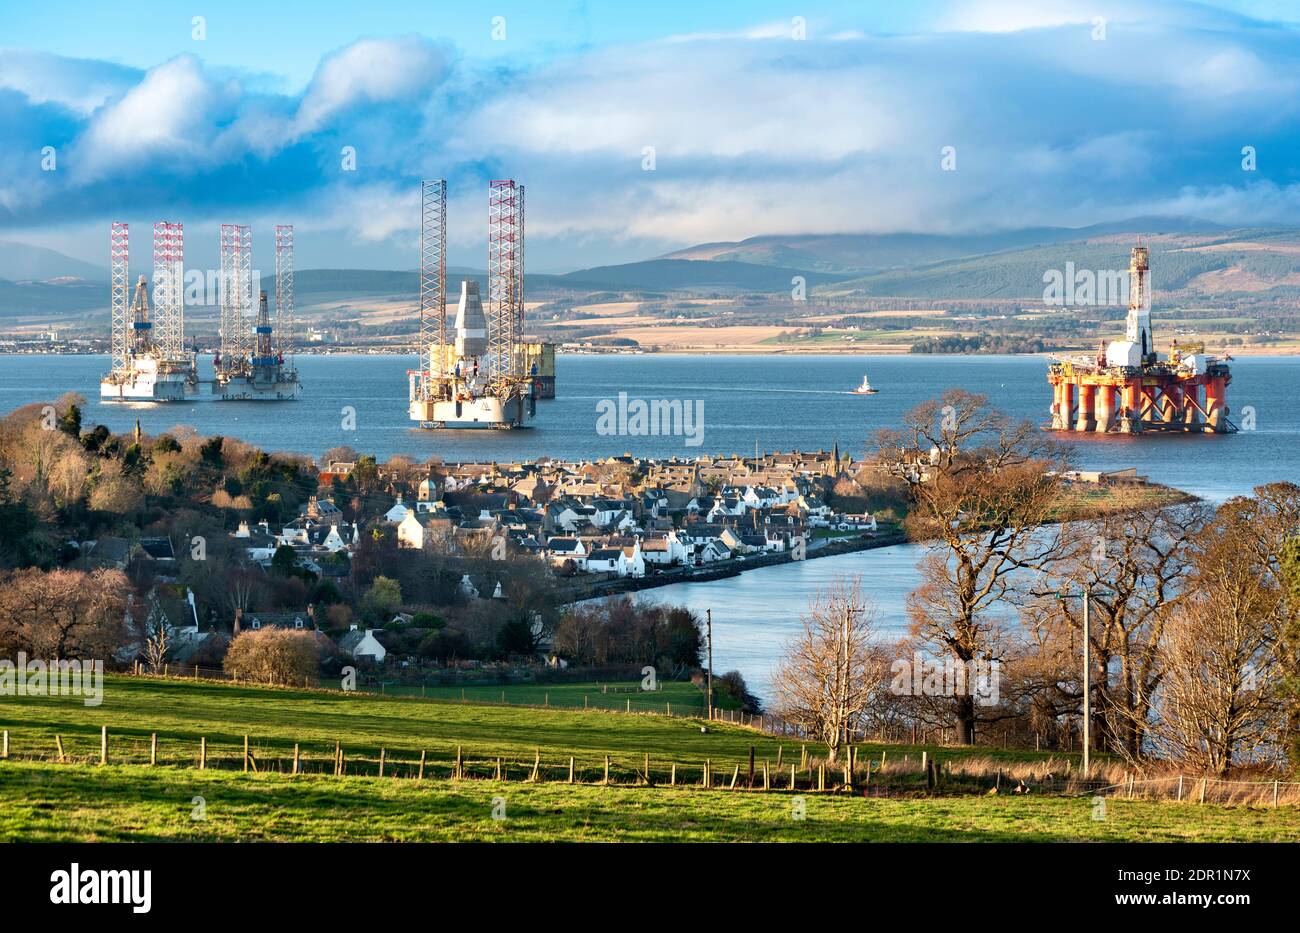 CROMARTY BLACK ISLE PENINSULAR SCOTLAND A VIEW OF VILLAGE THE HOUSES AND OIL RIGS OR PLATFORMS IN THE CROMARTY FIRTH Stock Photo